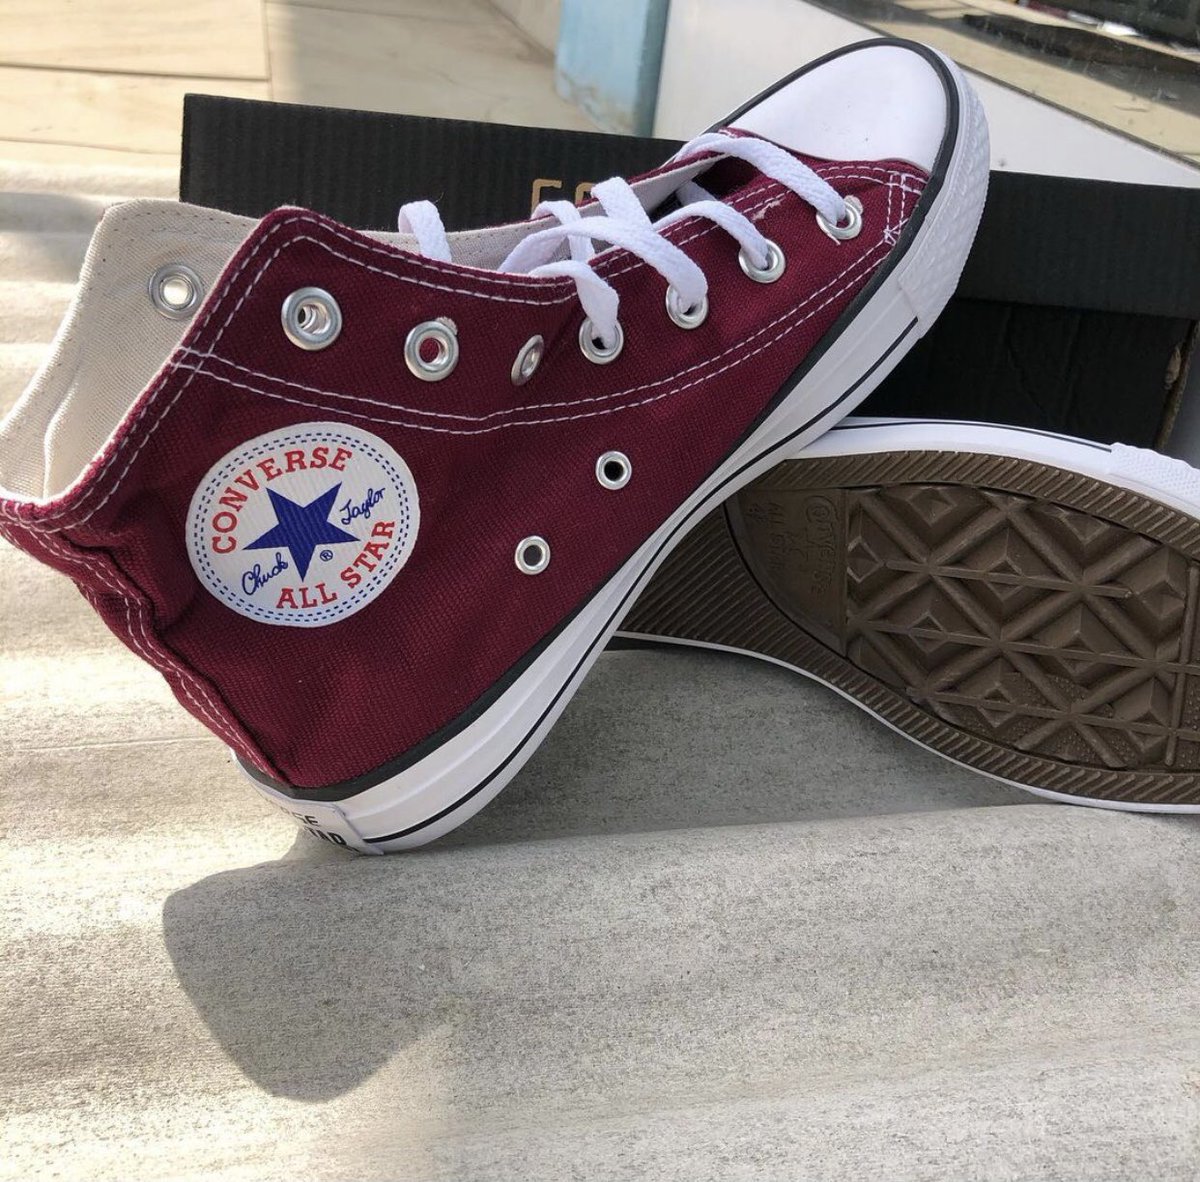 ✨ Burgundy Chuck Taylor All Stars Converse(high tops)

✨Sizes:38-45

✨80.00

✨Delivery and pick up options are available!

✨Kindly rt when you see this. Thanks!❤️
#FIFAWorldCup2022 #Qatar2022
#WizkidLiveAccra